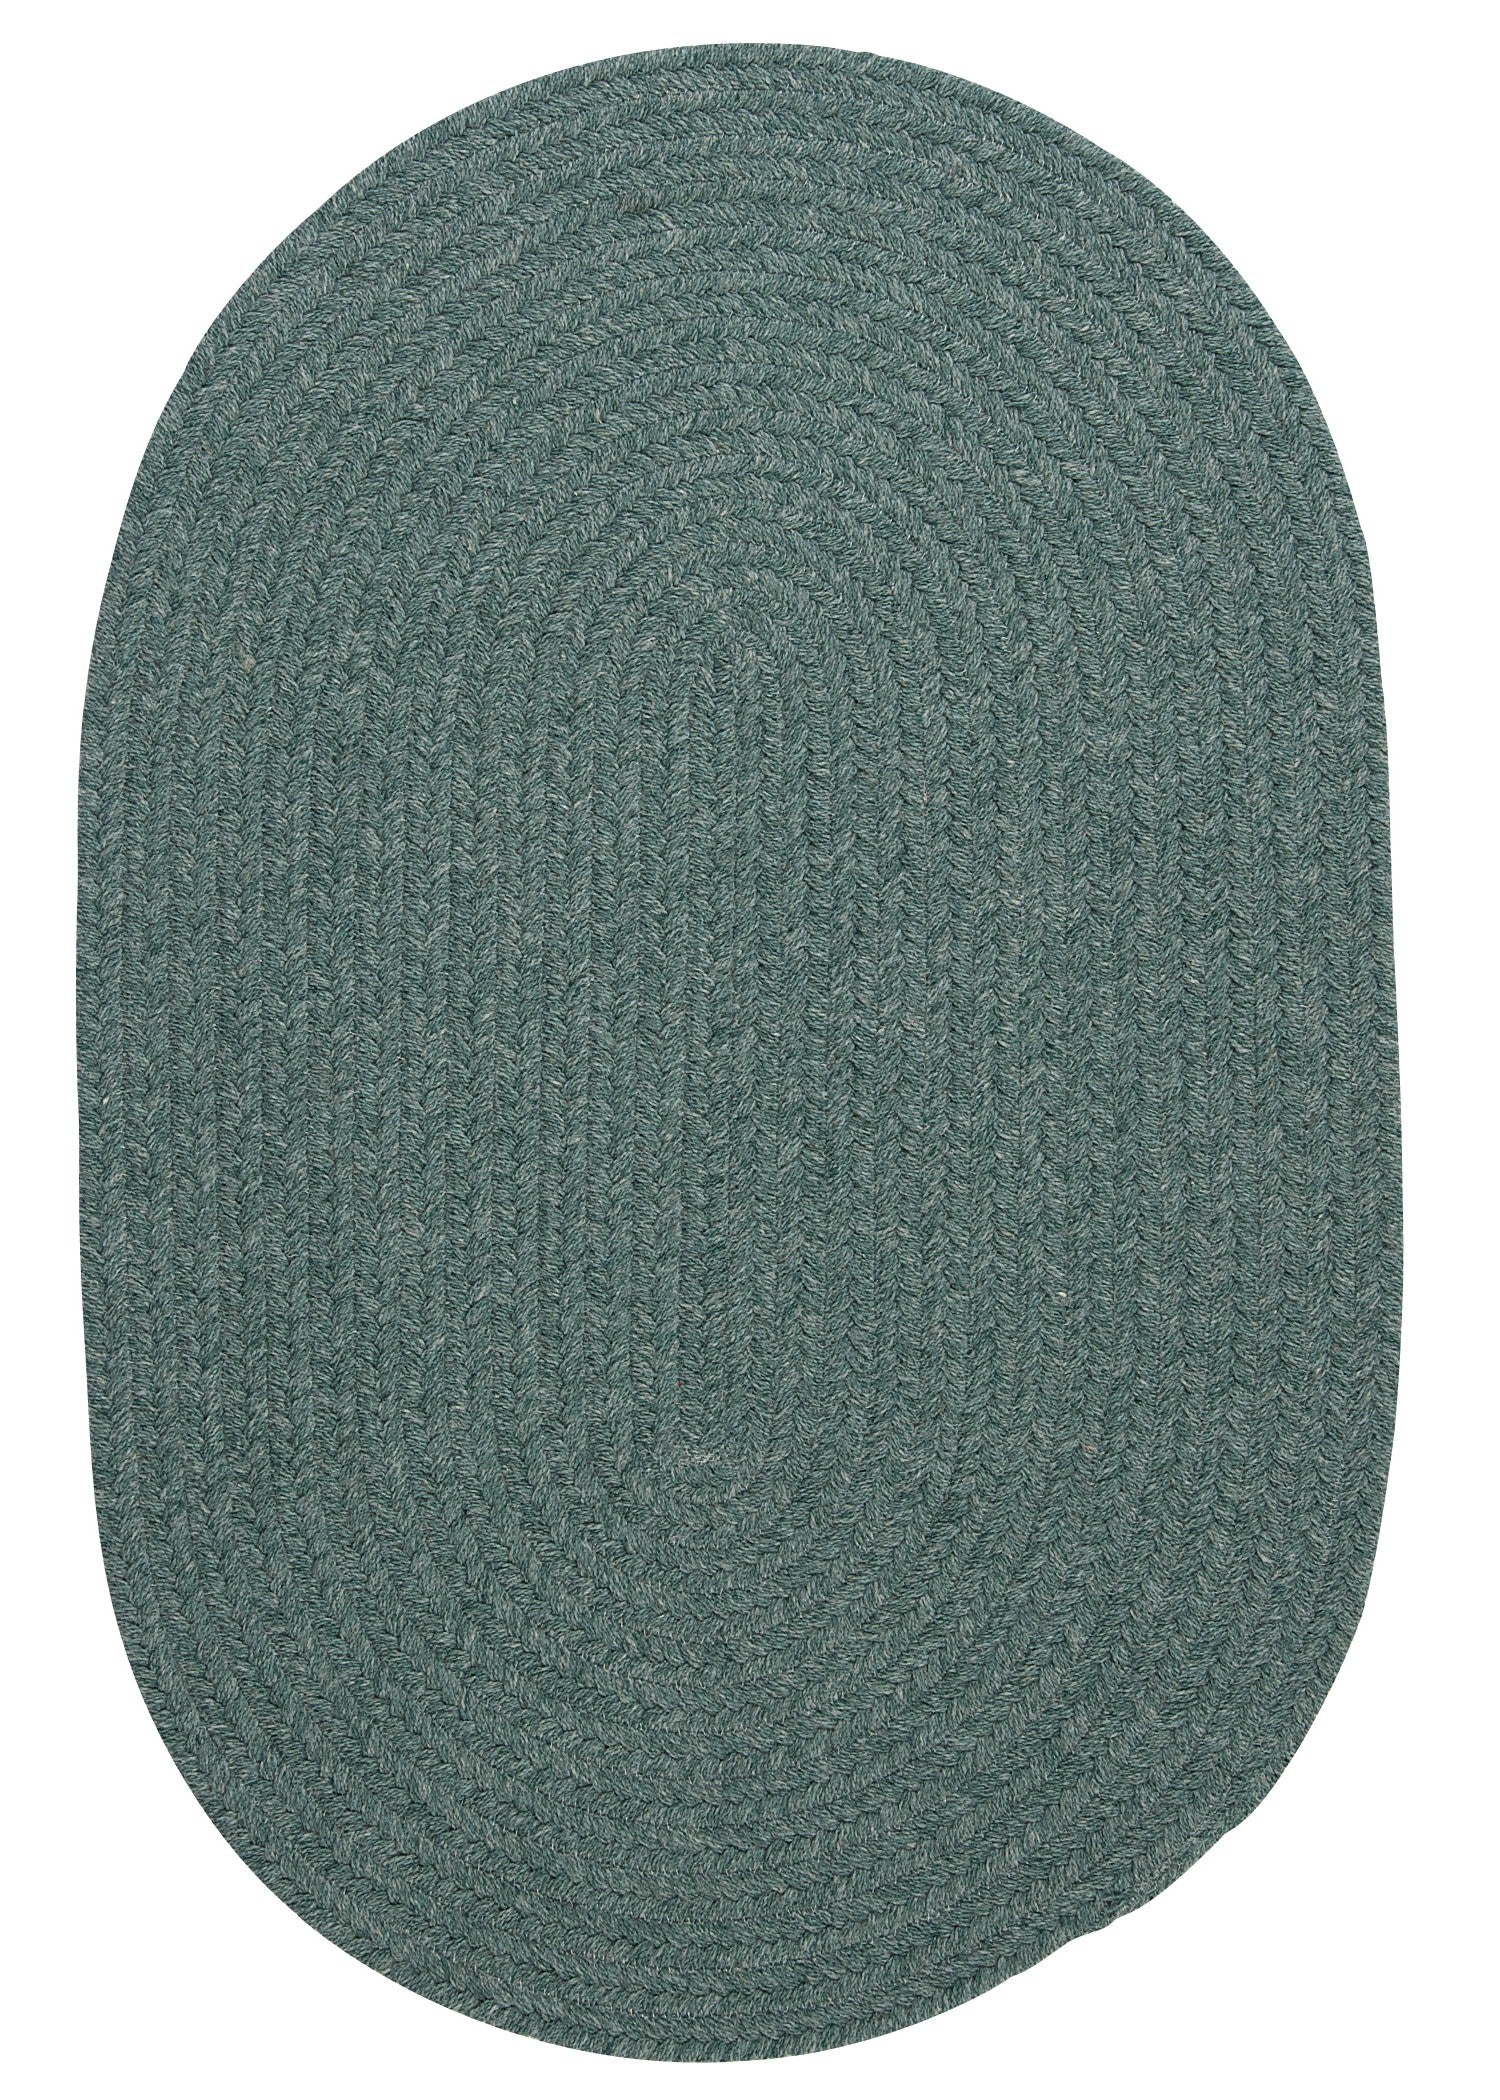 Colonial Mills Bristol WL27 Teal Traditional Area Rug